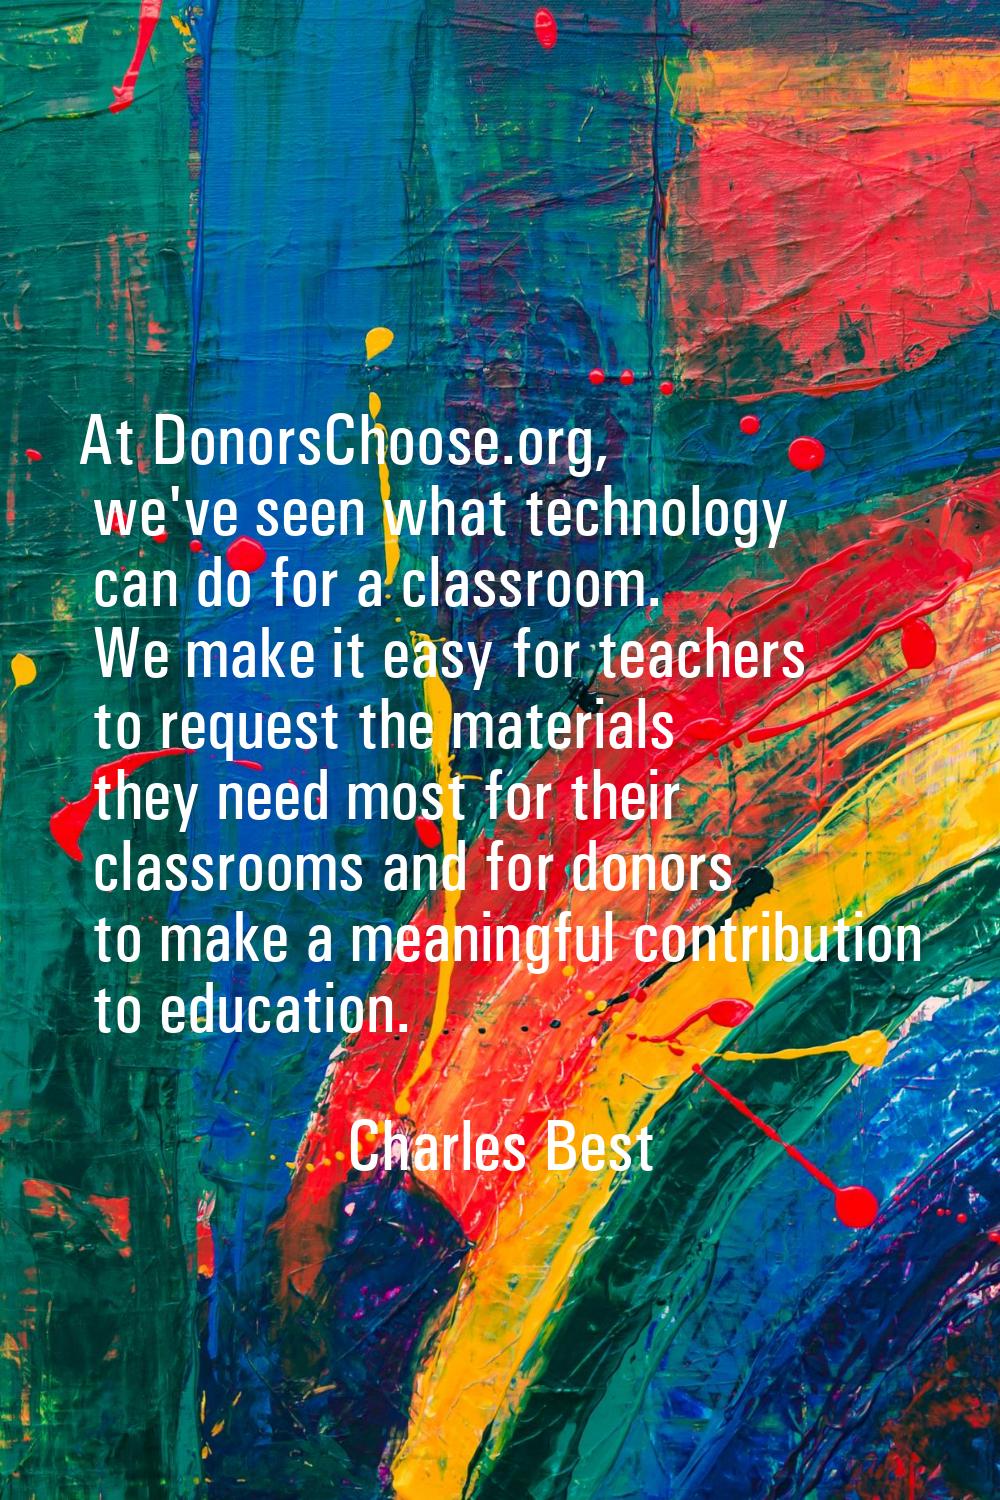 At DonorsChoose.org, we've seen what technology can do for a classroom. We make it easy for teacher